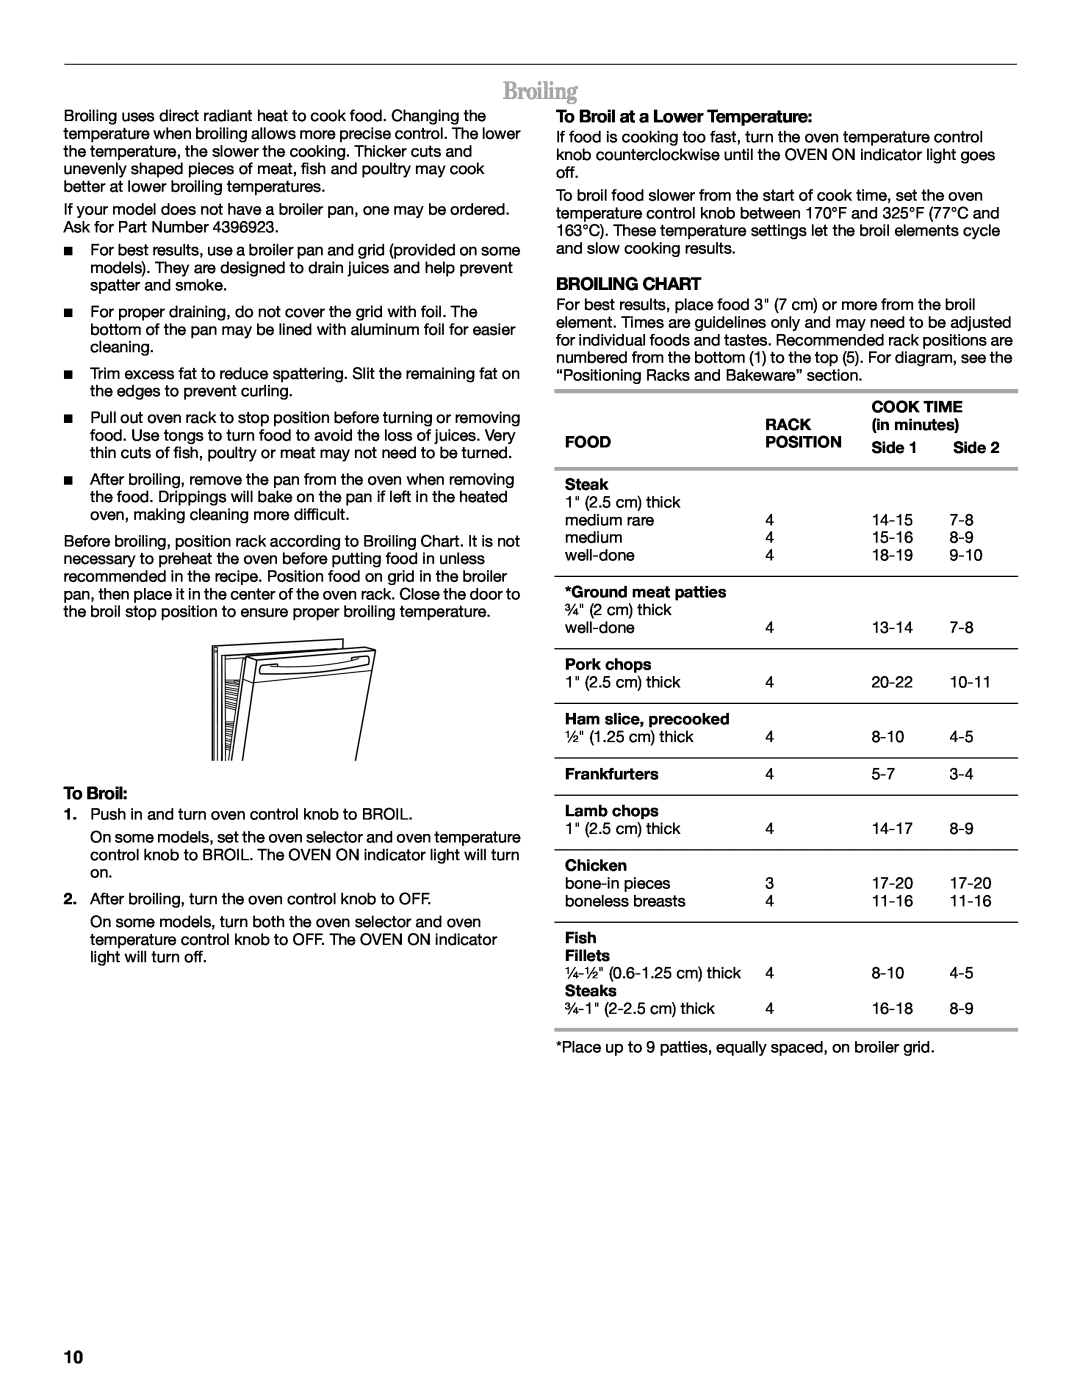 Whirlpool RF3020XKQ2 manual To Broil at a Lower Temperature, Broiling Chart 